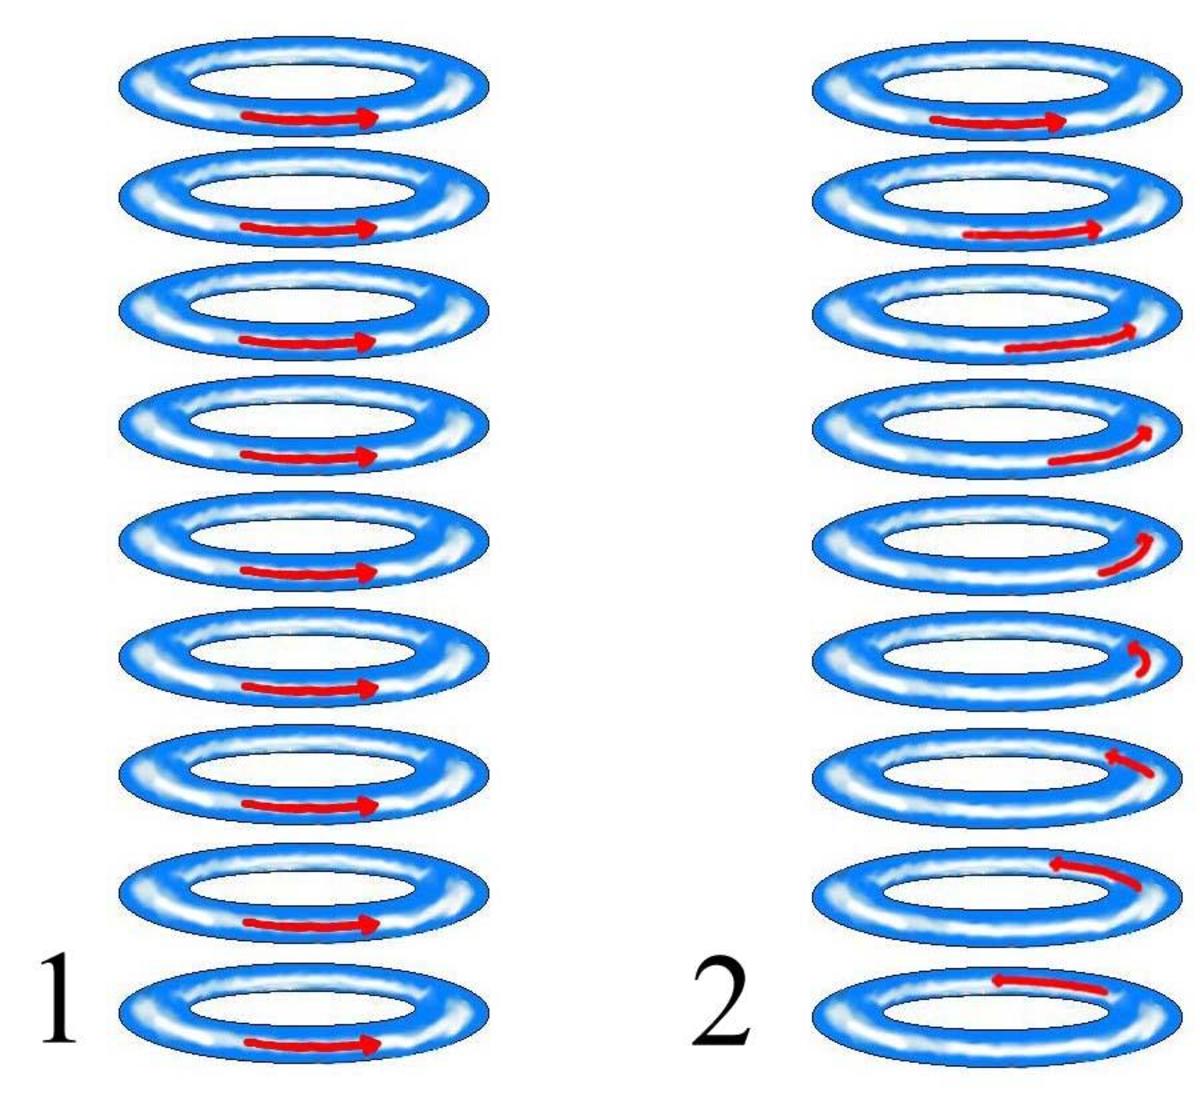 Magnetic coils can either be non collimated or electronically rotated to create collimation. 